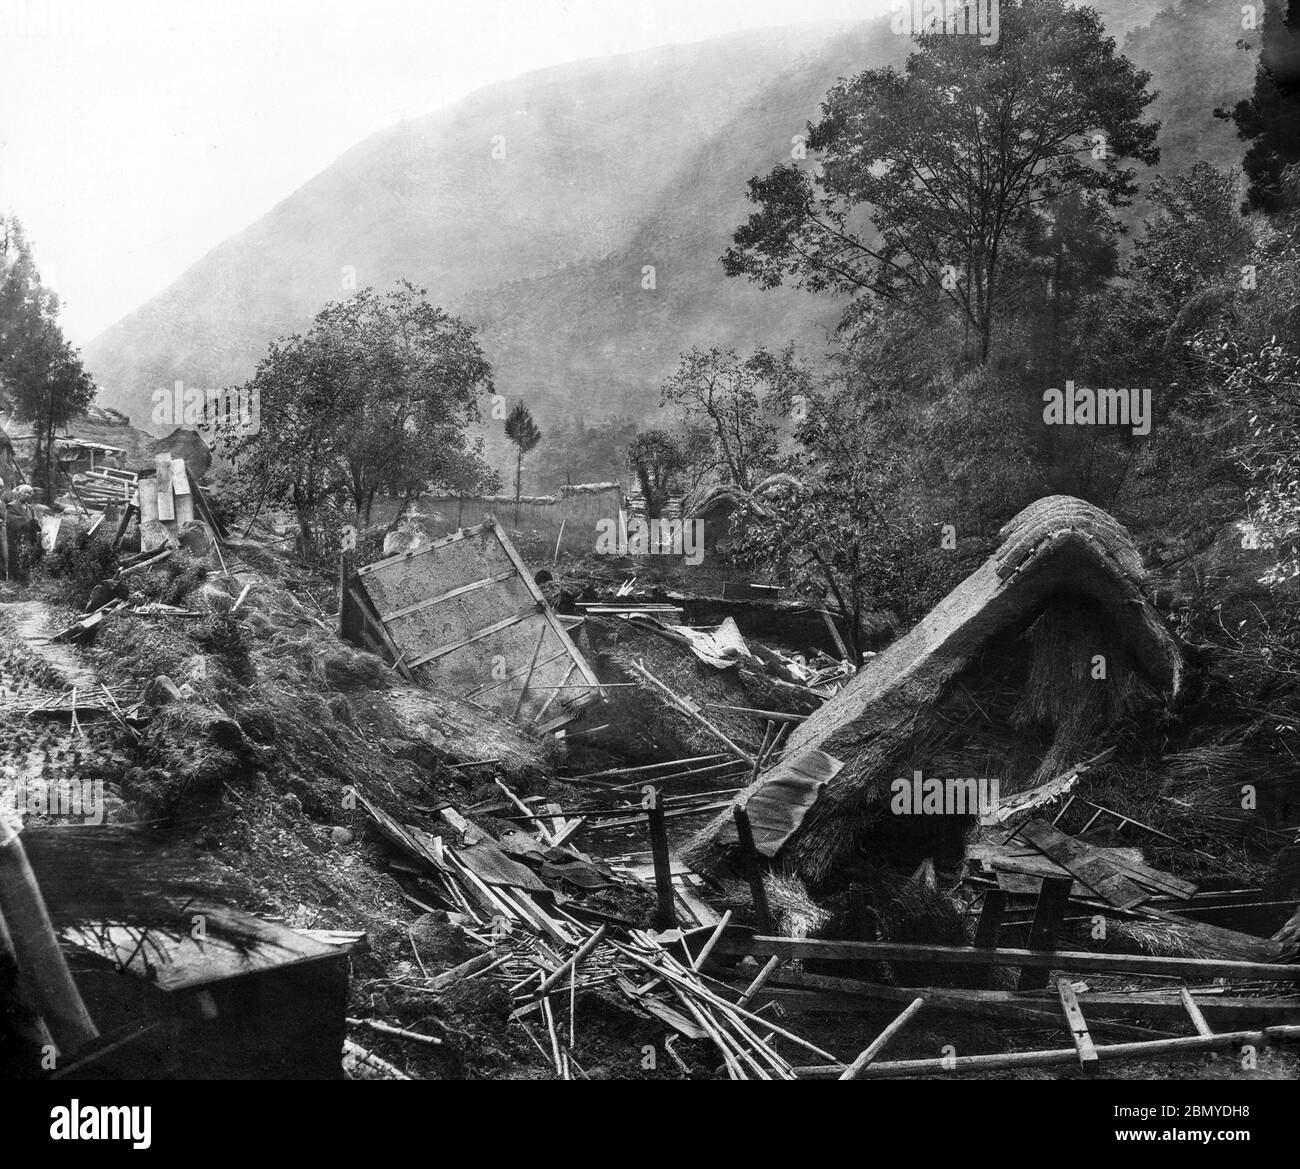 [ 1890s Japan - Nobi Earthquake ] —   Devastation in the Neodani Valley (根尾谷) in Gifu Prefecture, caused by the Nobi Earthquake (濃尾地震, Nobi Jishin) of October 28, 1891 (Meiji 24).  The Nobi Earthquake measured between 8.0 and 8.4 on the scale of Richter and caused 7,273 deaths, 17,175 casualties and the destruction of 142,177 homes.  19th century vintage glass slide. Stock Photo